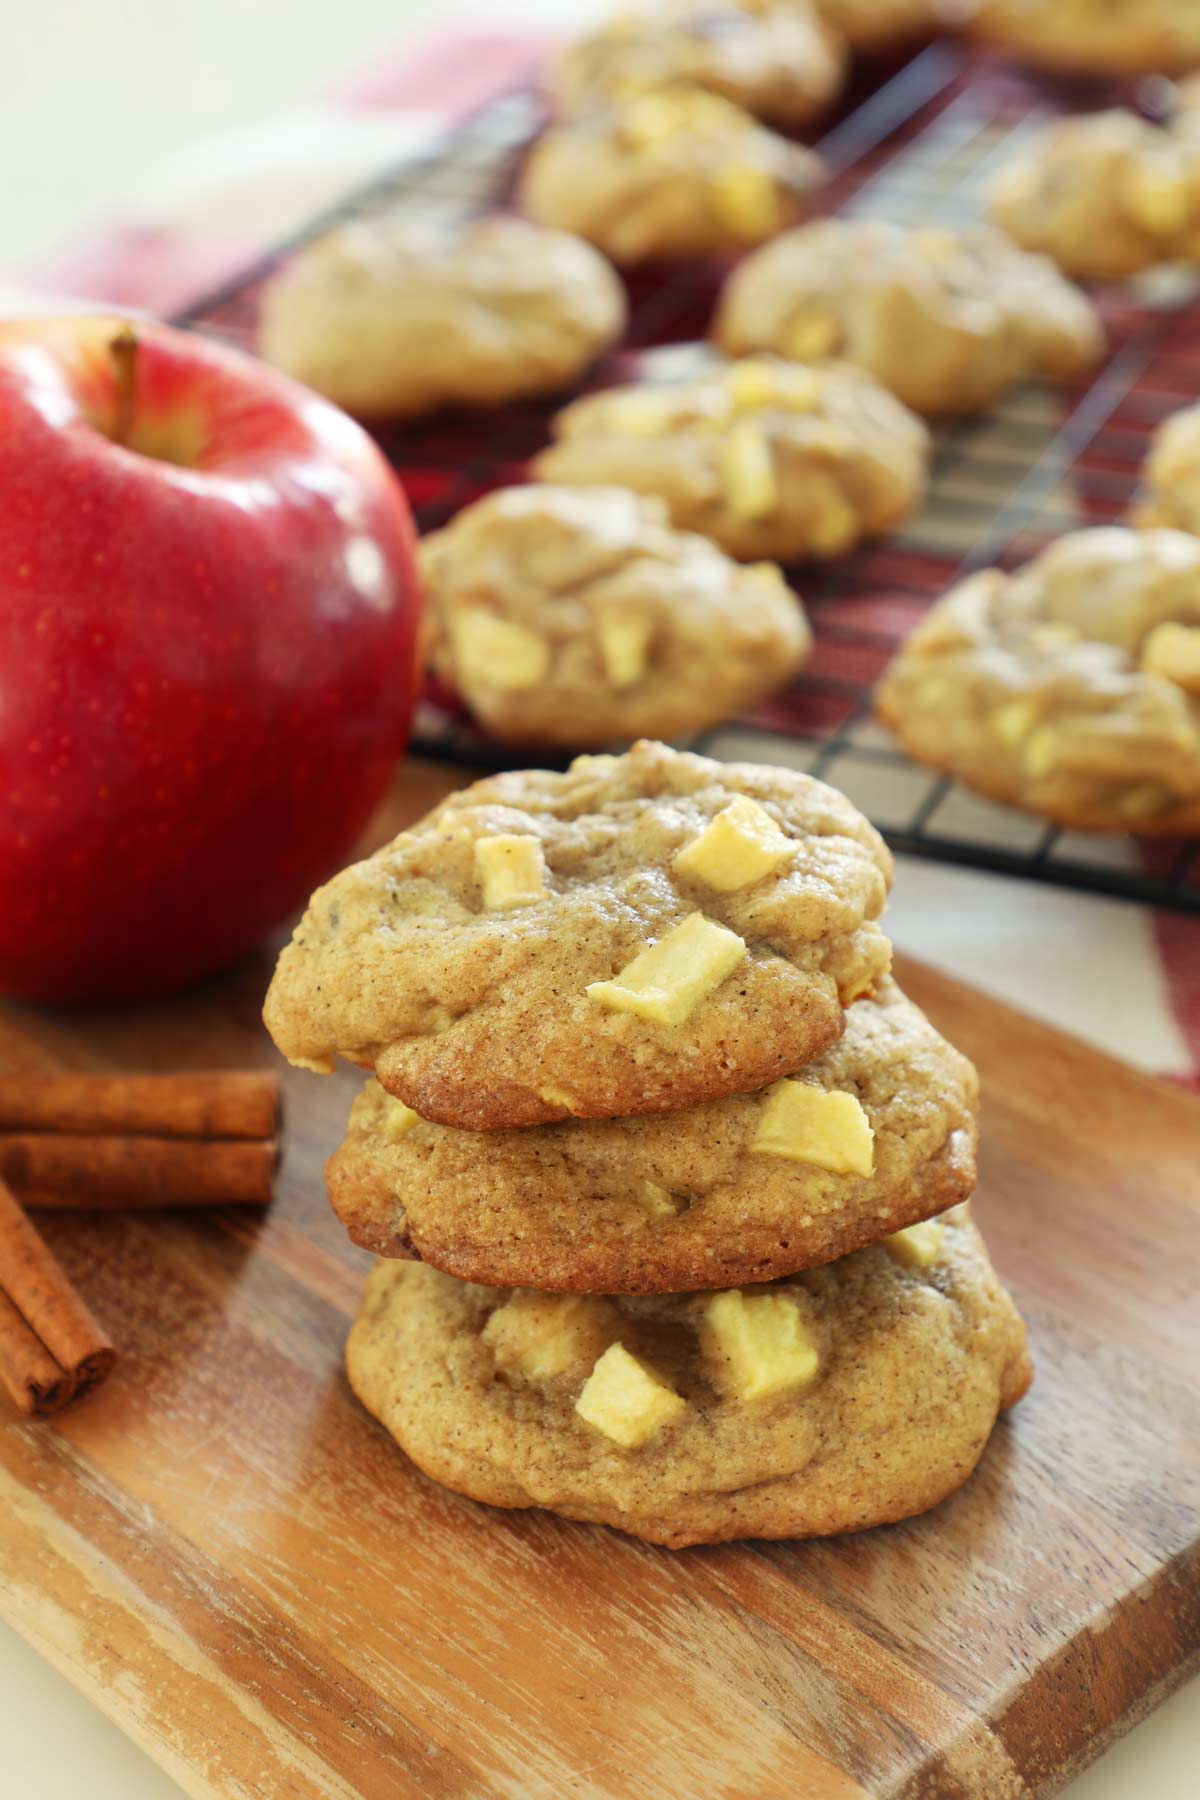 Three apple cookies stacked on a cutting board with a cookie cooling rack in the background with cinnamon sticks and an apple.